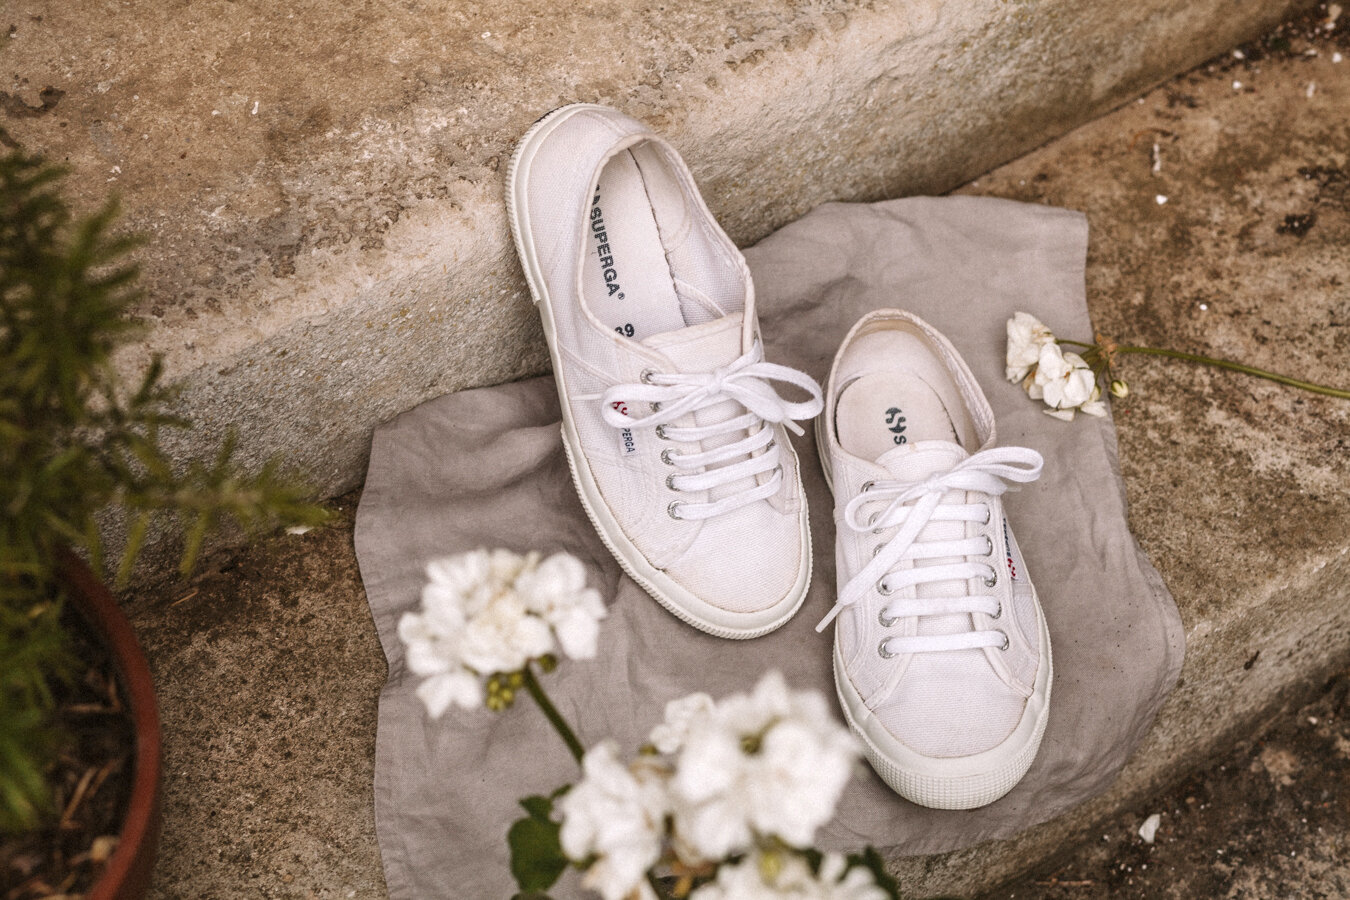 Clean Canvas Trainers in a Natural Way 